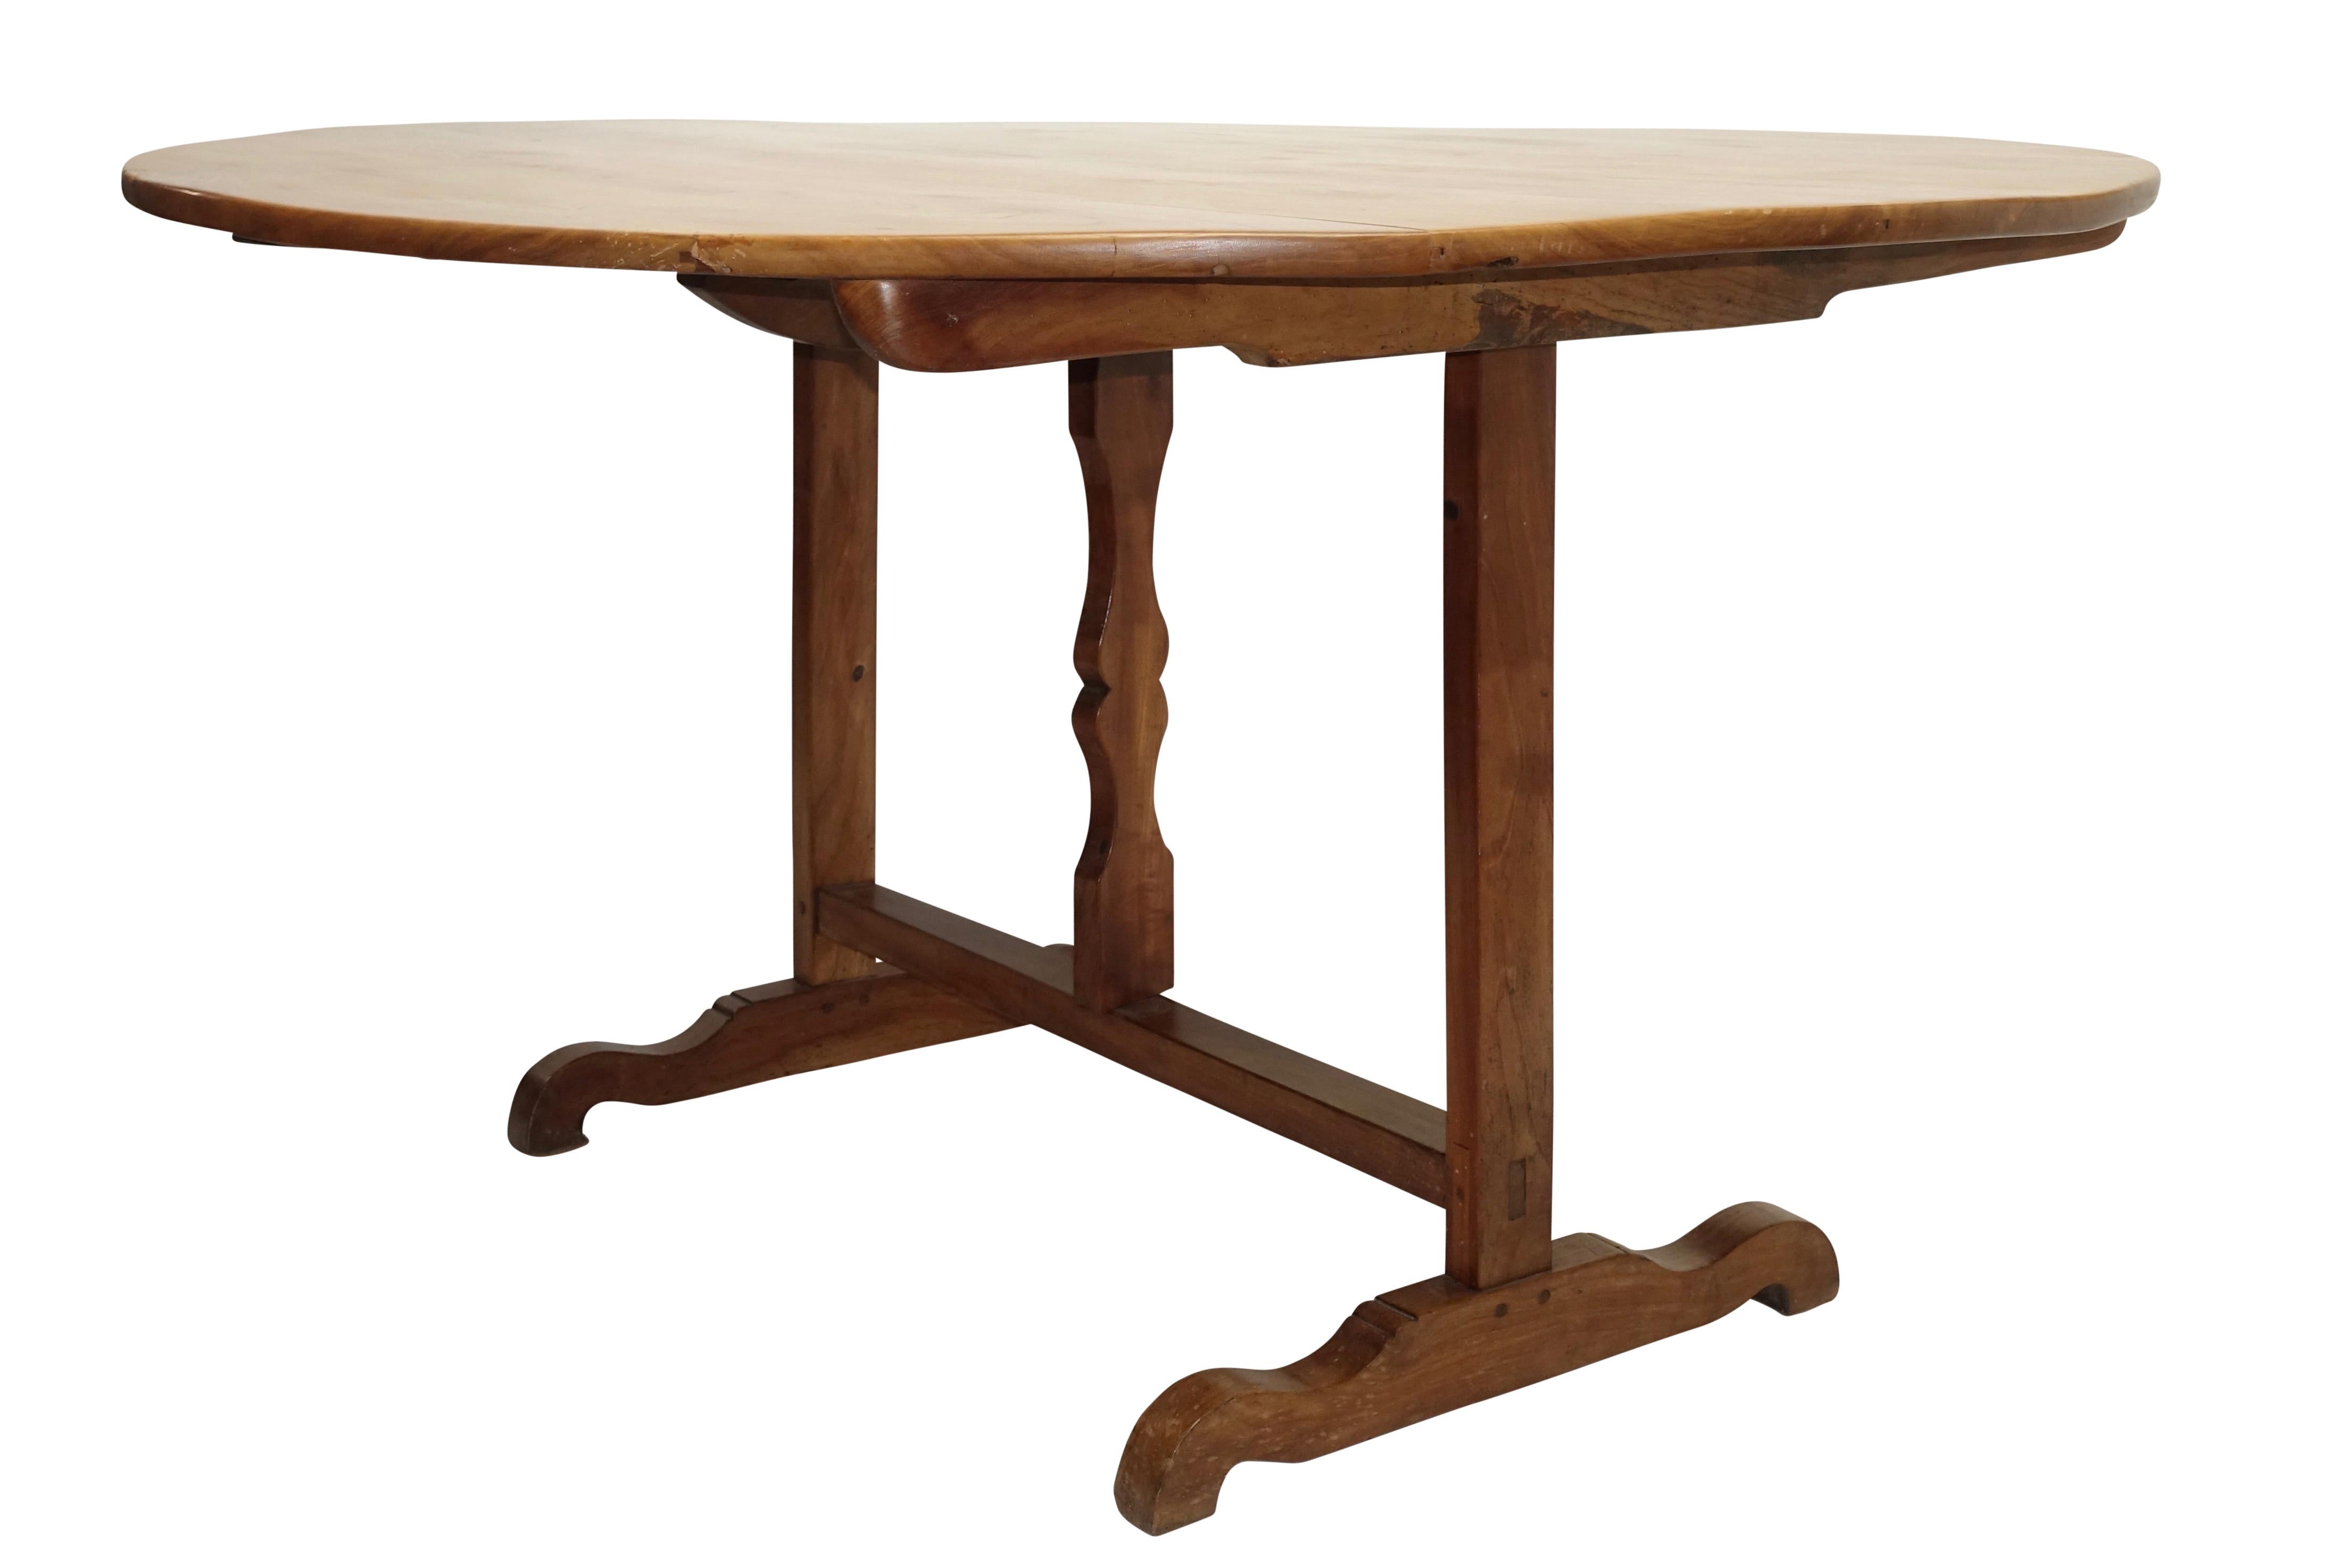 An unusual large round vendange bookspined cherrywood tilting wine tasting table with butterfly wedge support on a trestle base with cross bow feet, France, 19th century.